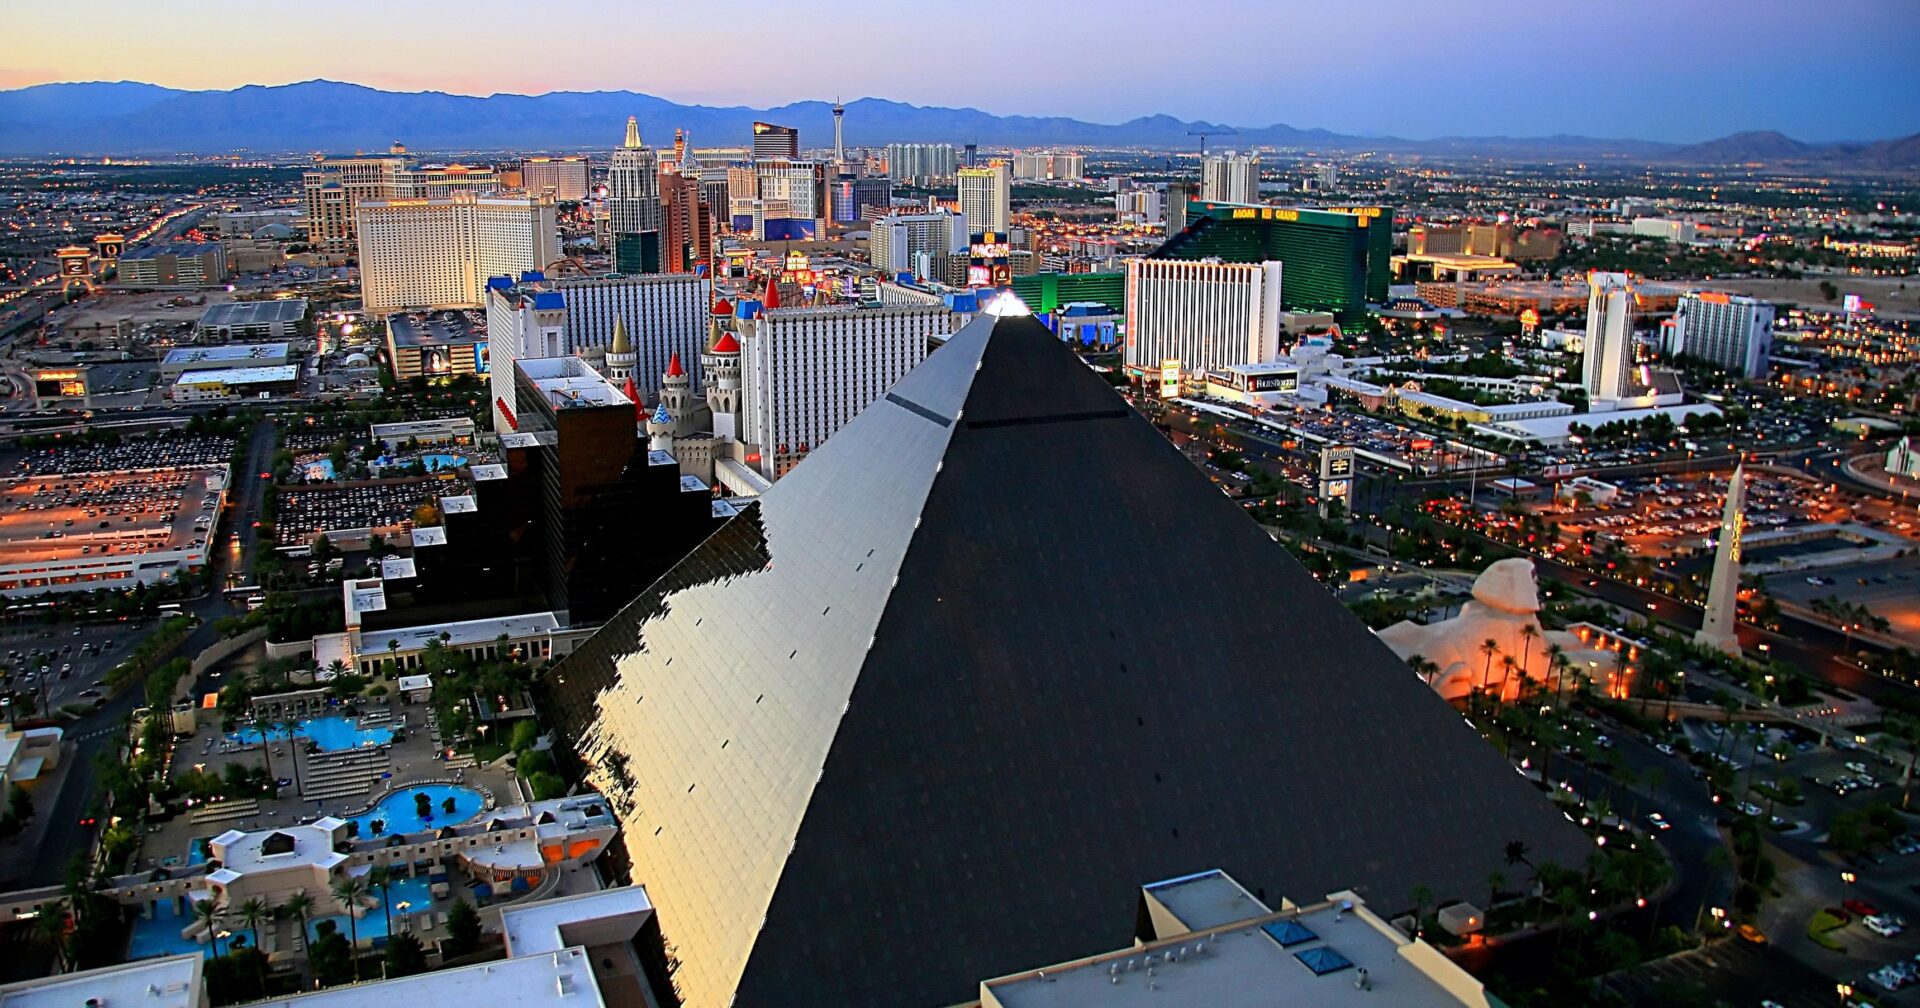 Las Vegas Strip from South - Is March a good time to visit for nice weather?